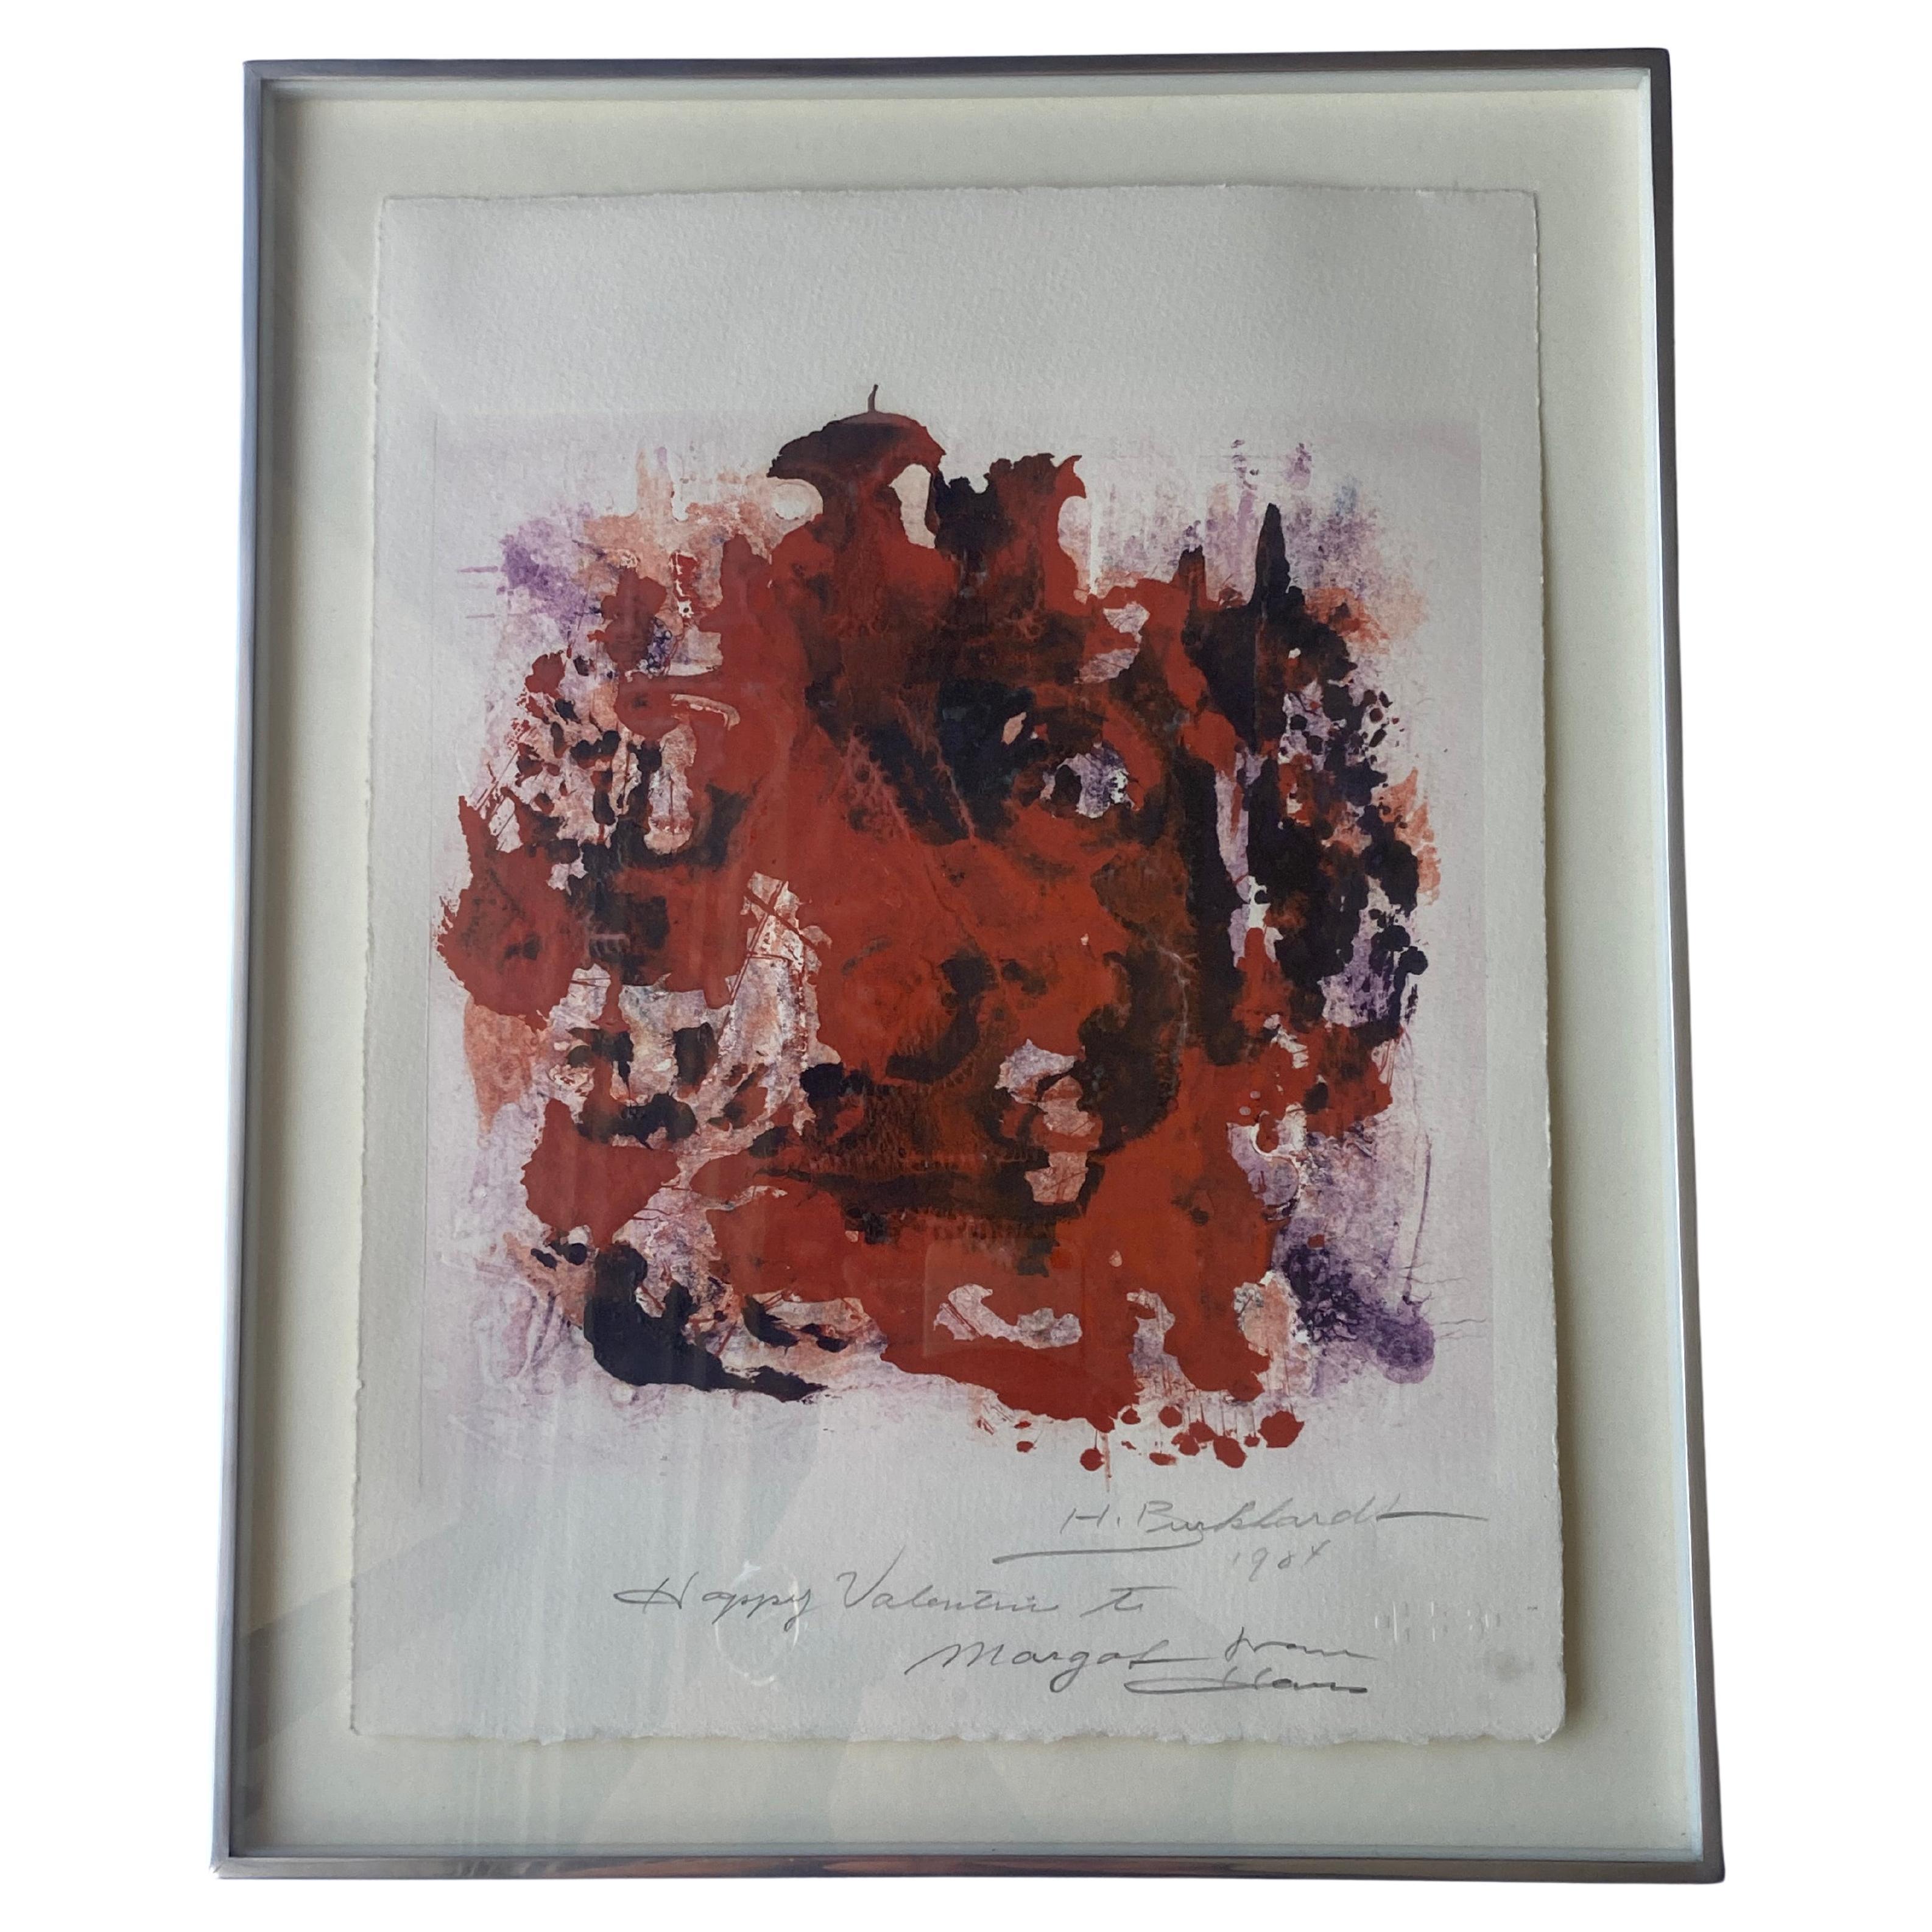 Hans Gustav Burkhardt Acrylic Abstract Painting on Paper, Pencil Signed